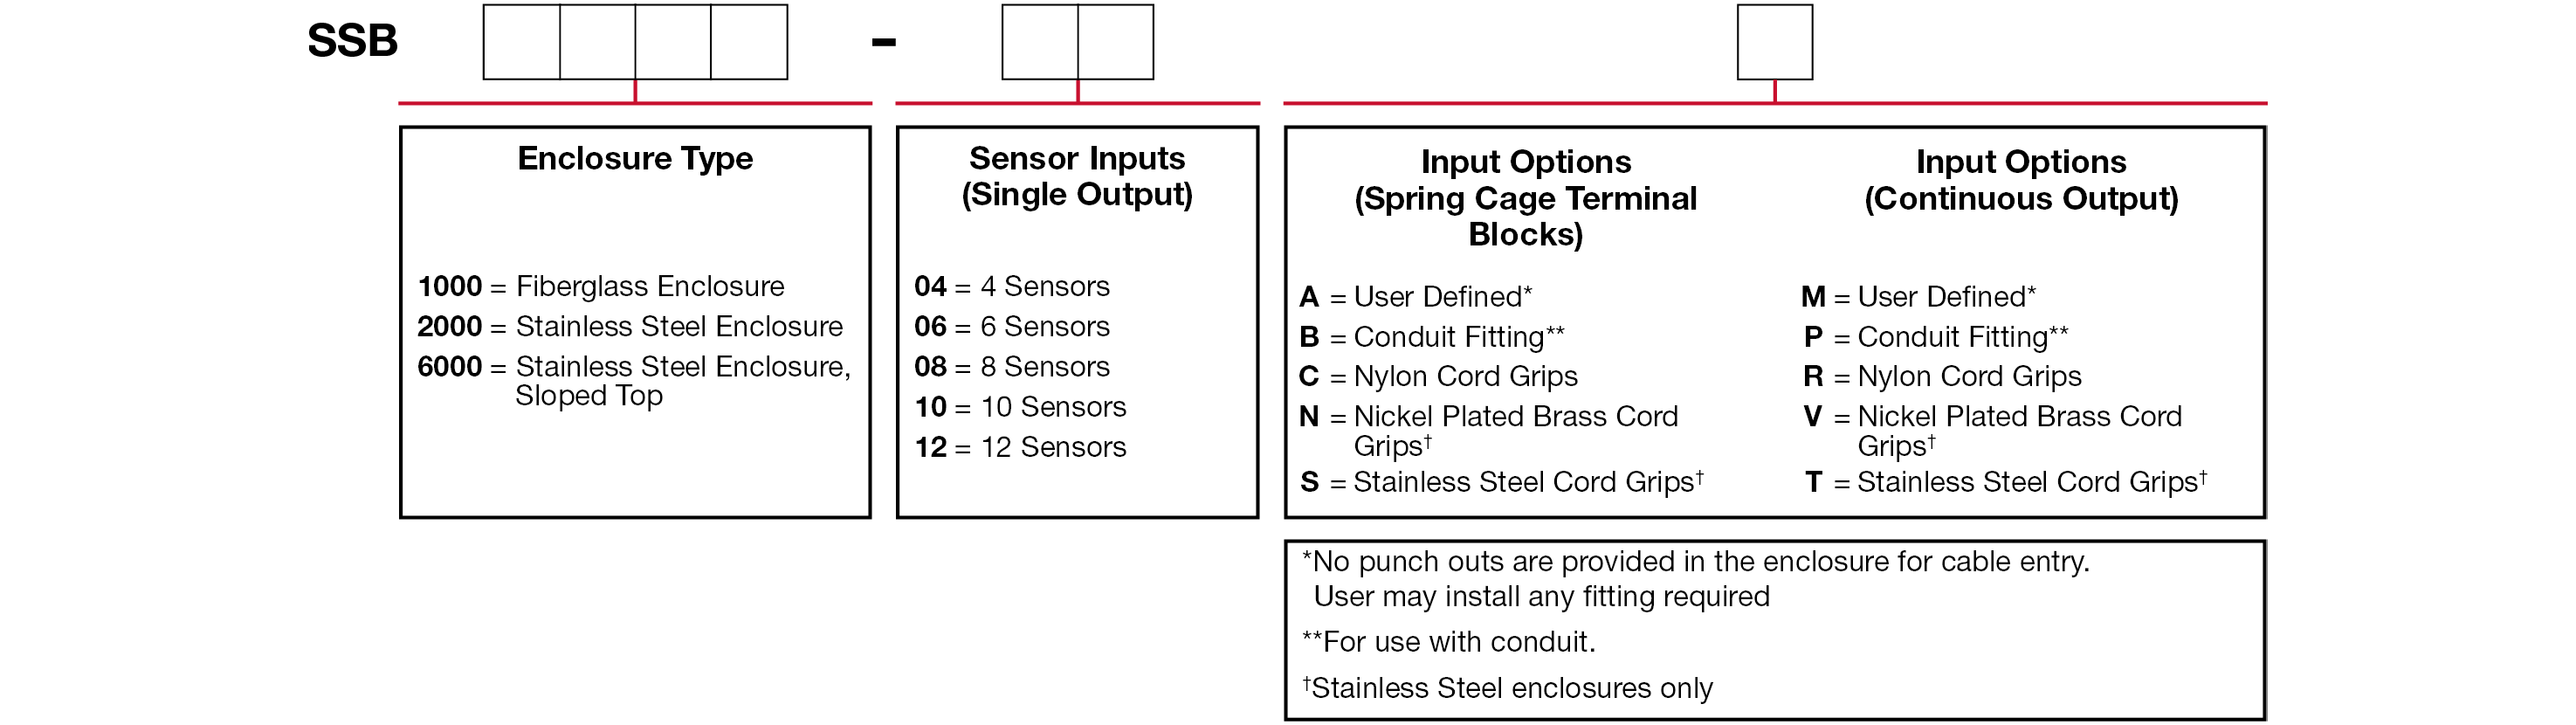 A chart showing configuration options to create a complete part number for ordering a CTC SSB1000 enclosure.